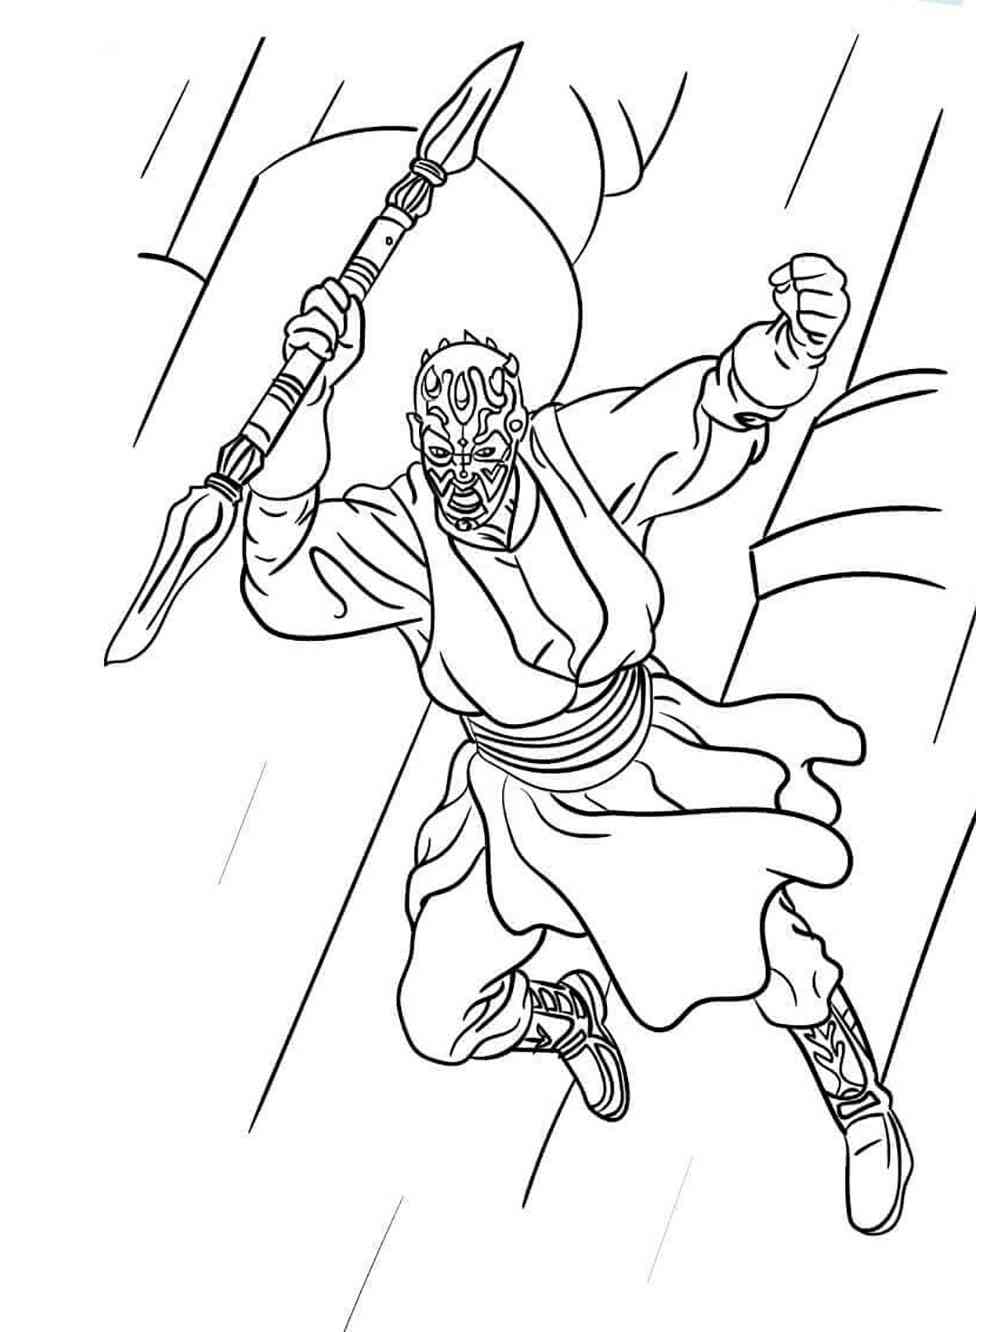 Darth Maul coloring pages